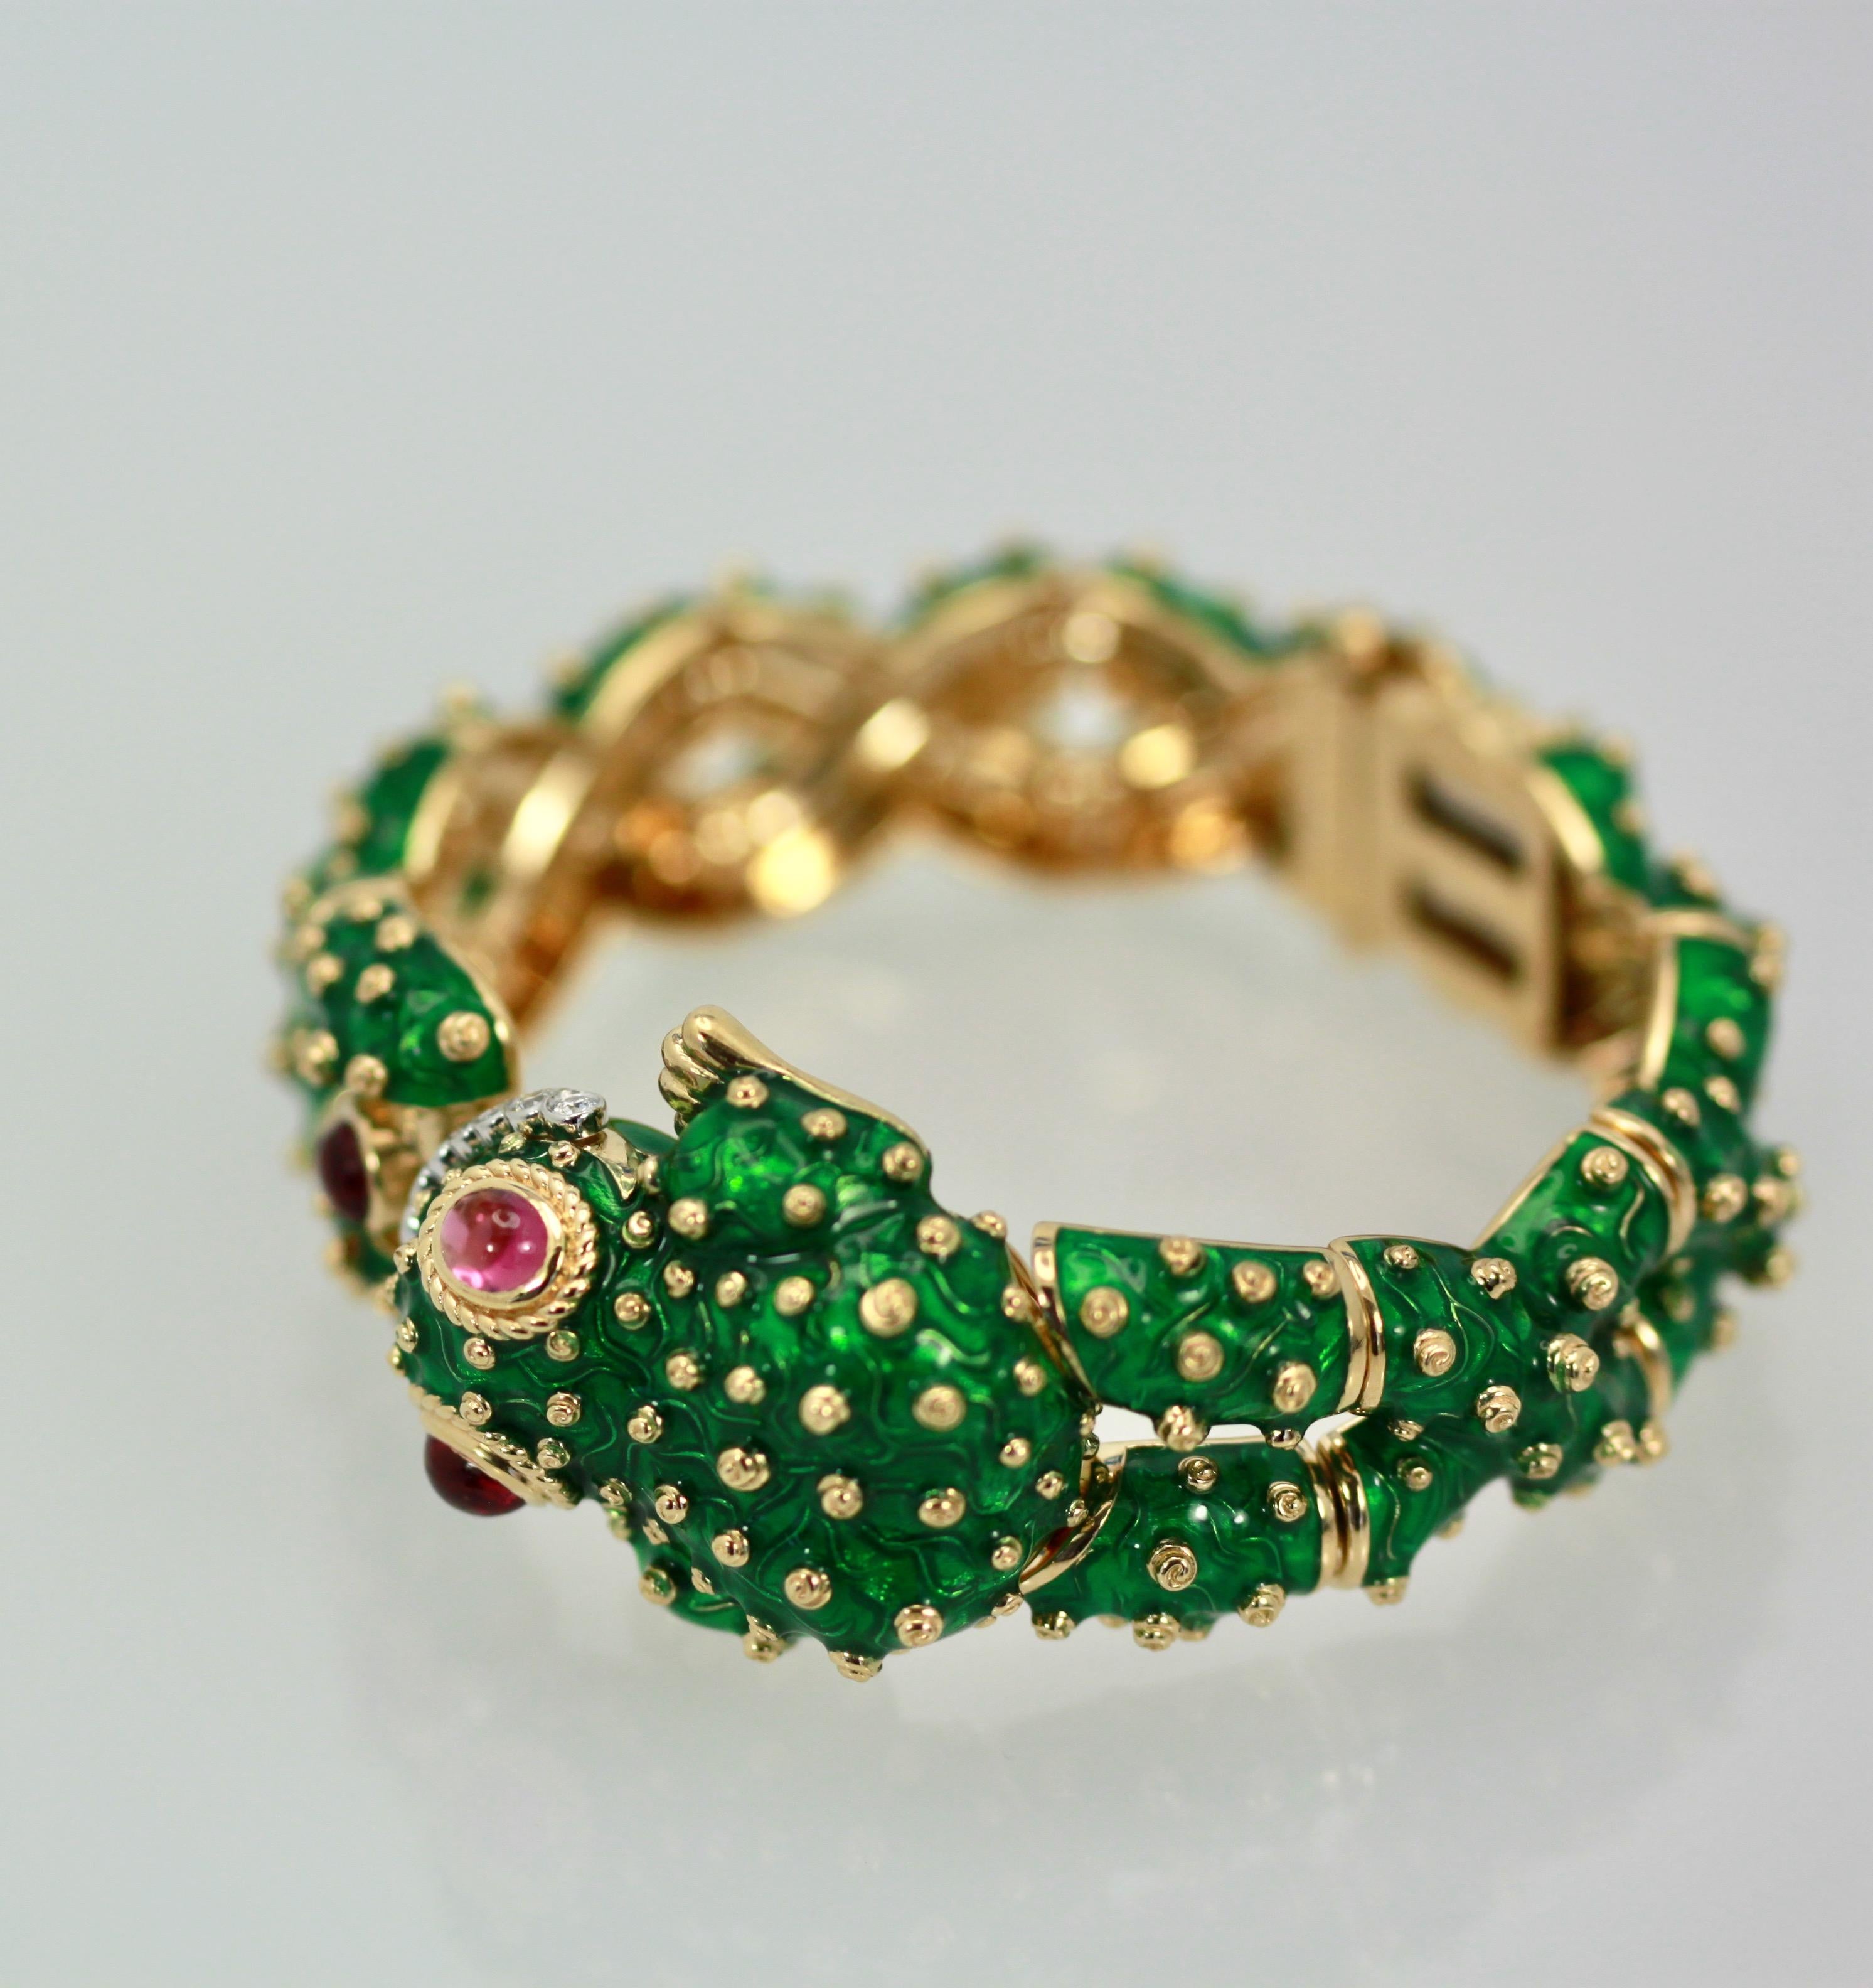 This gorgeous David Webb Frog bracelet is amazing and for a smaller wrist.  Most David Webb bracelets are large if you have a small wrist like myself.  This bracelet fits a smaller wrist size 6 to 7 1/2